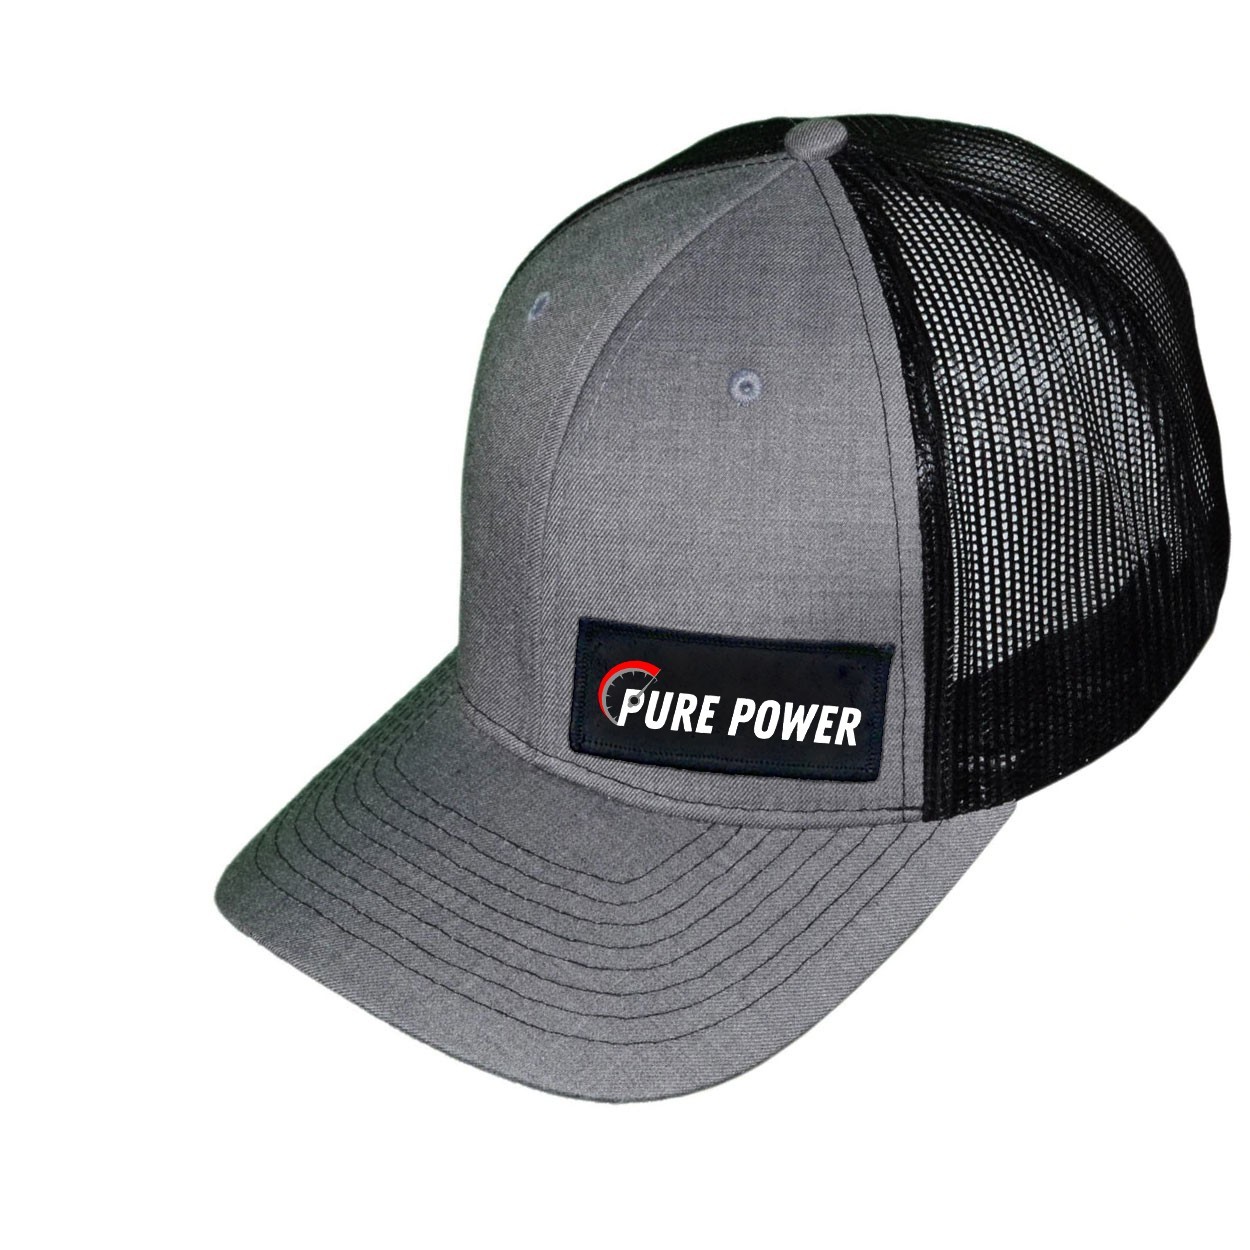 Ride Pure Power Logo Night Out Woven Patch Snapback Trucker Hat Heather Gray/Black (White Logo)